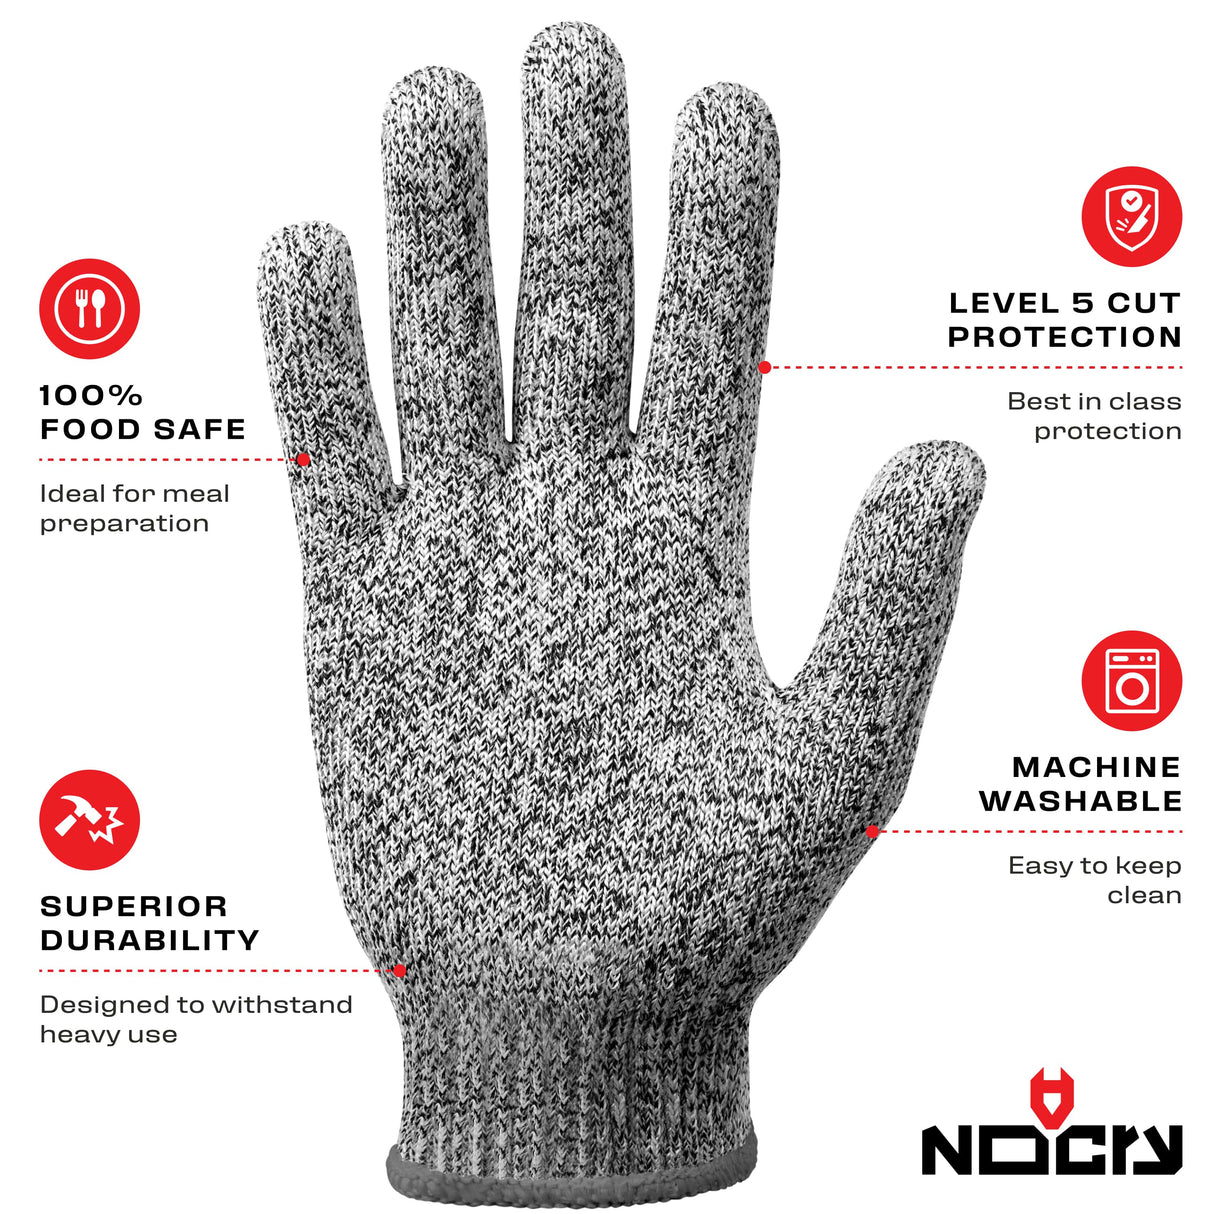 NoCry Cut Resistant Gloves with Grip Dots - High Performance Level 5 Protection, Food Grade. Size Small, Free eBook Included!